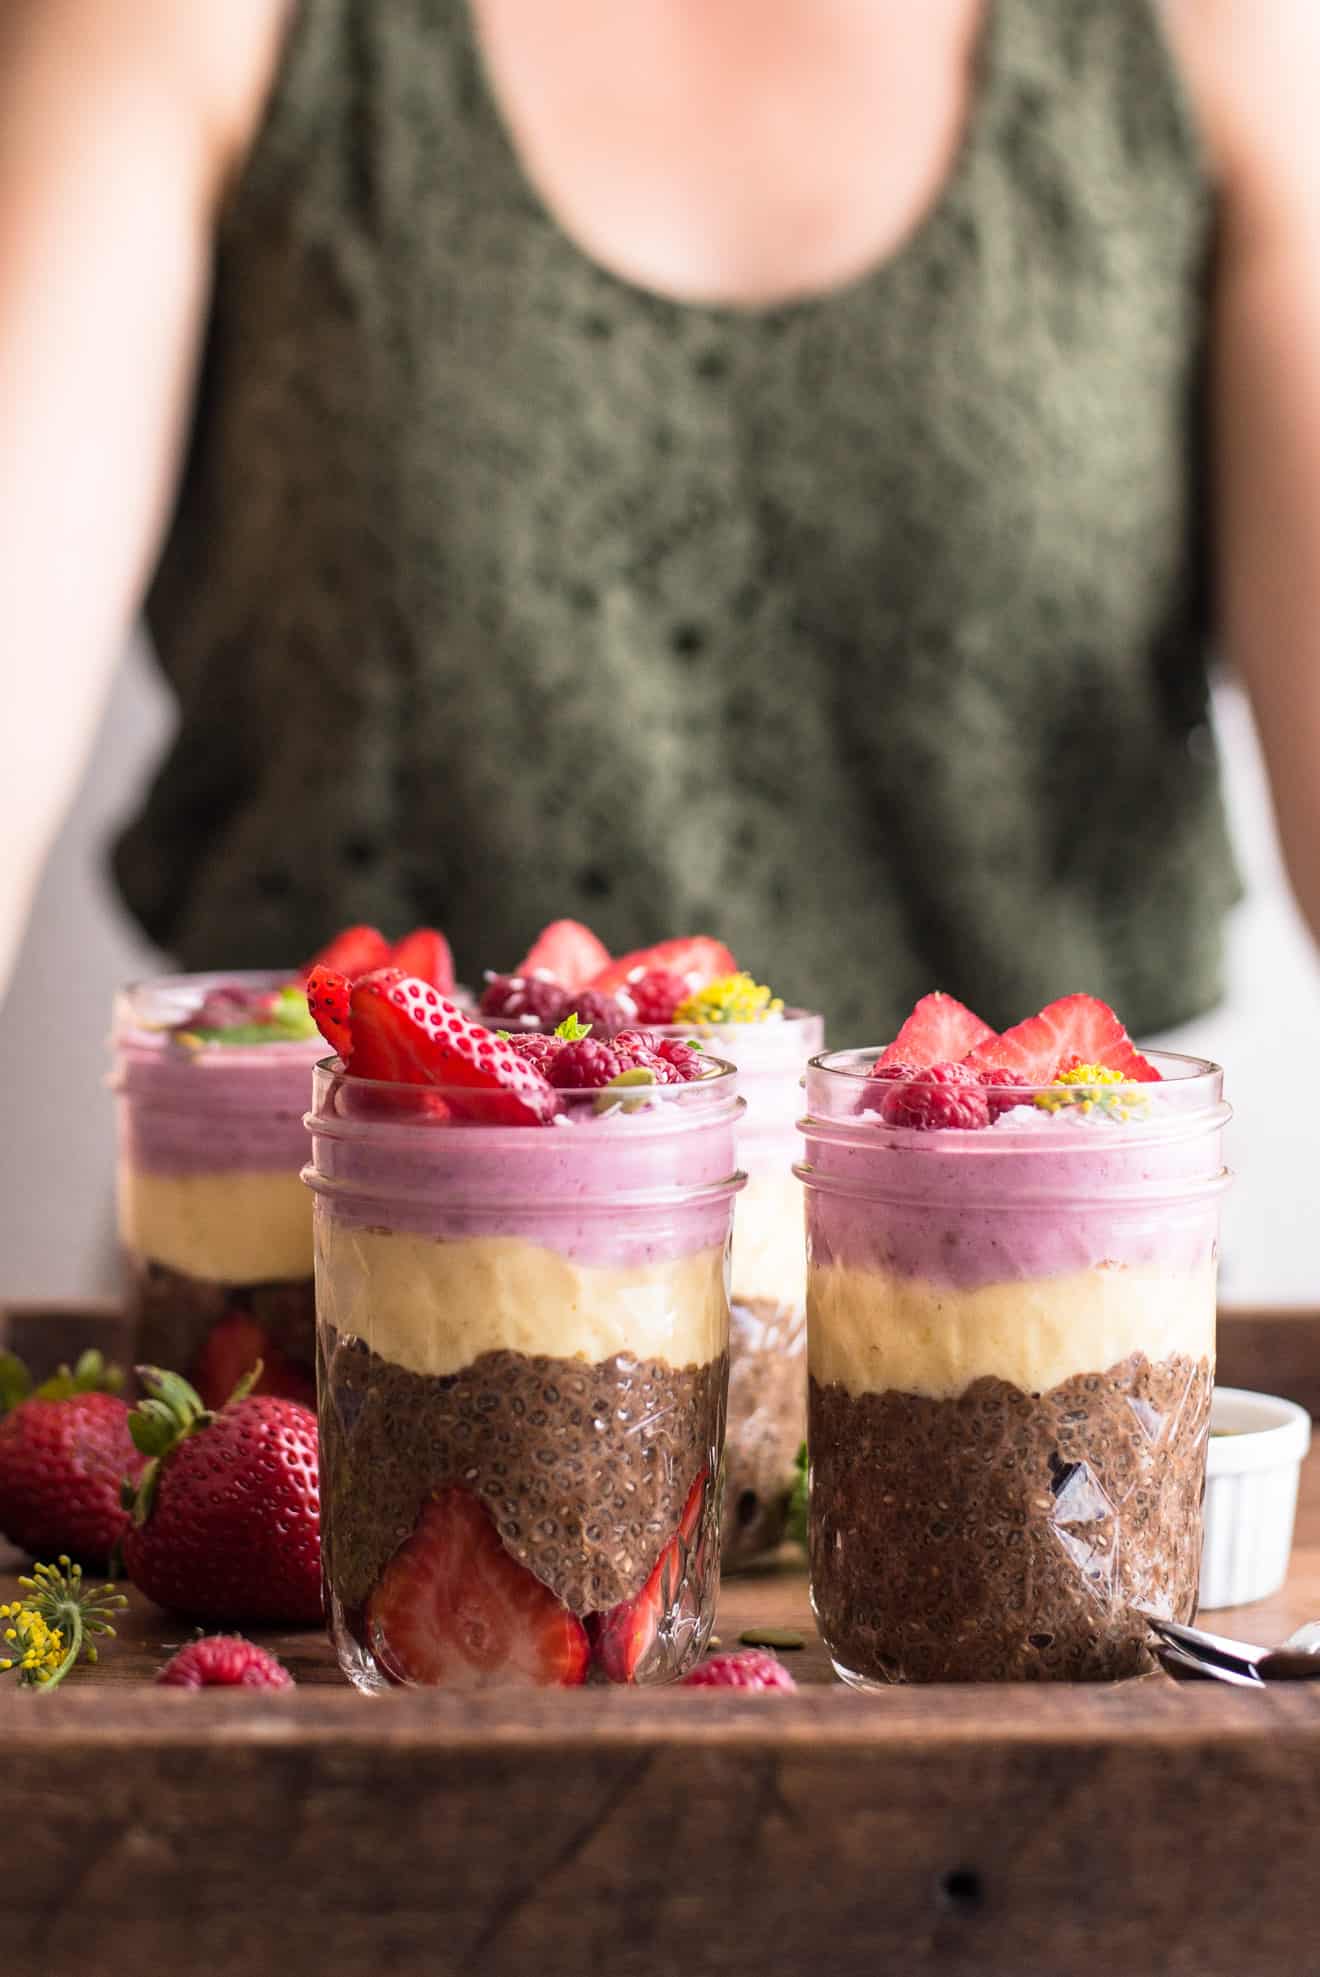 VEGAN Chocolate Chia Pudding Parfaits with Mango & Mixed Berry Mousse - a simple, healthy dessert that is great for summer!